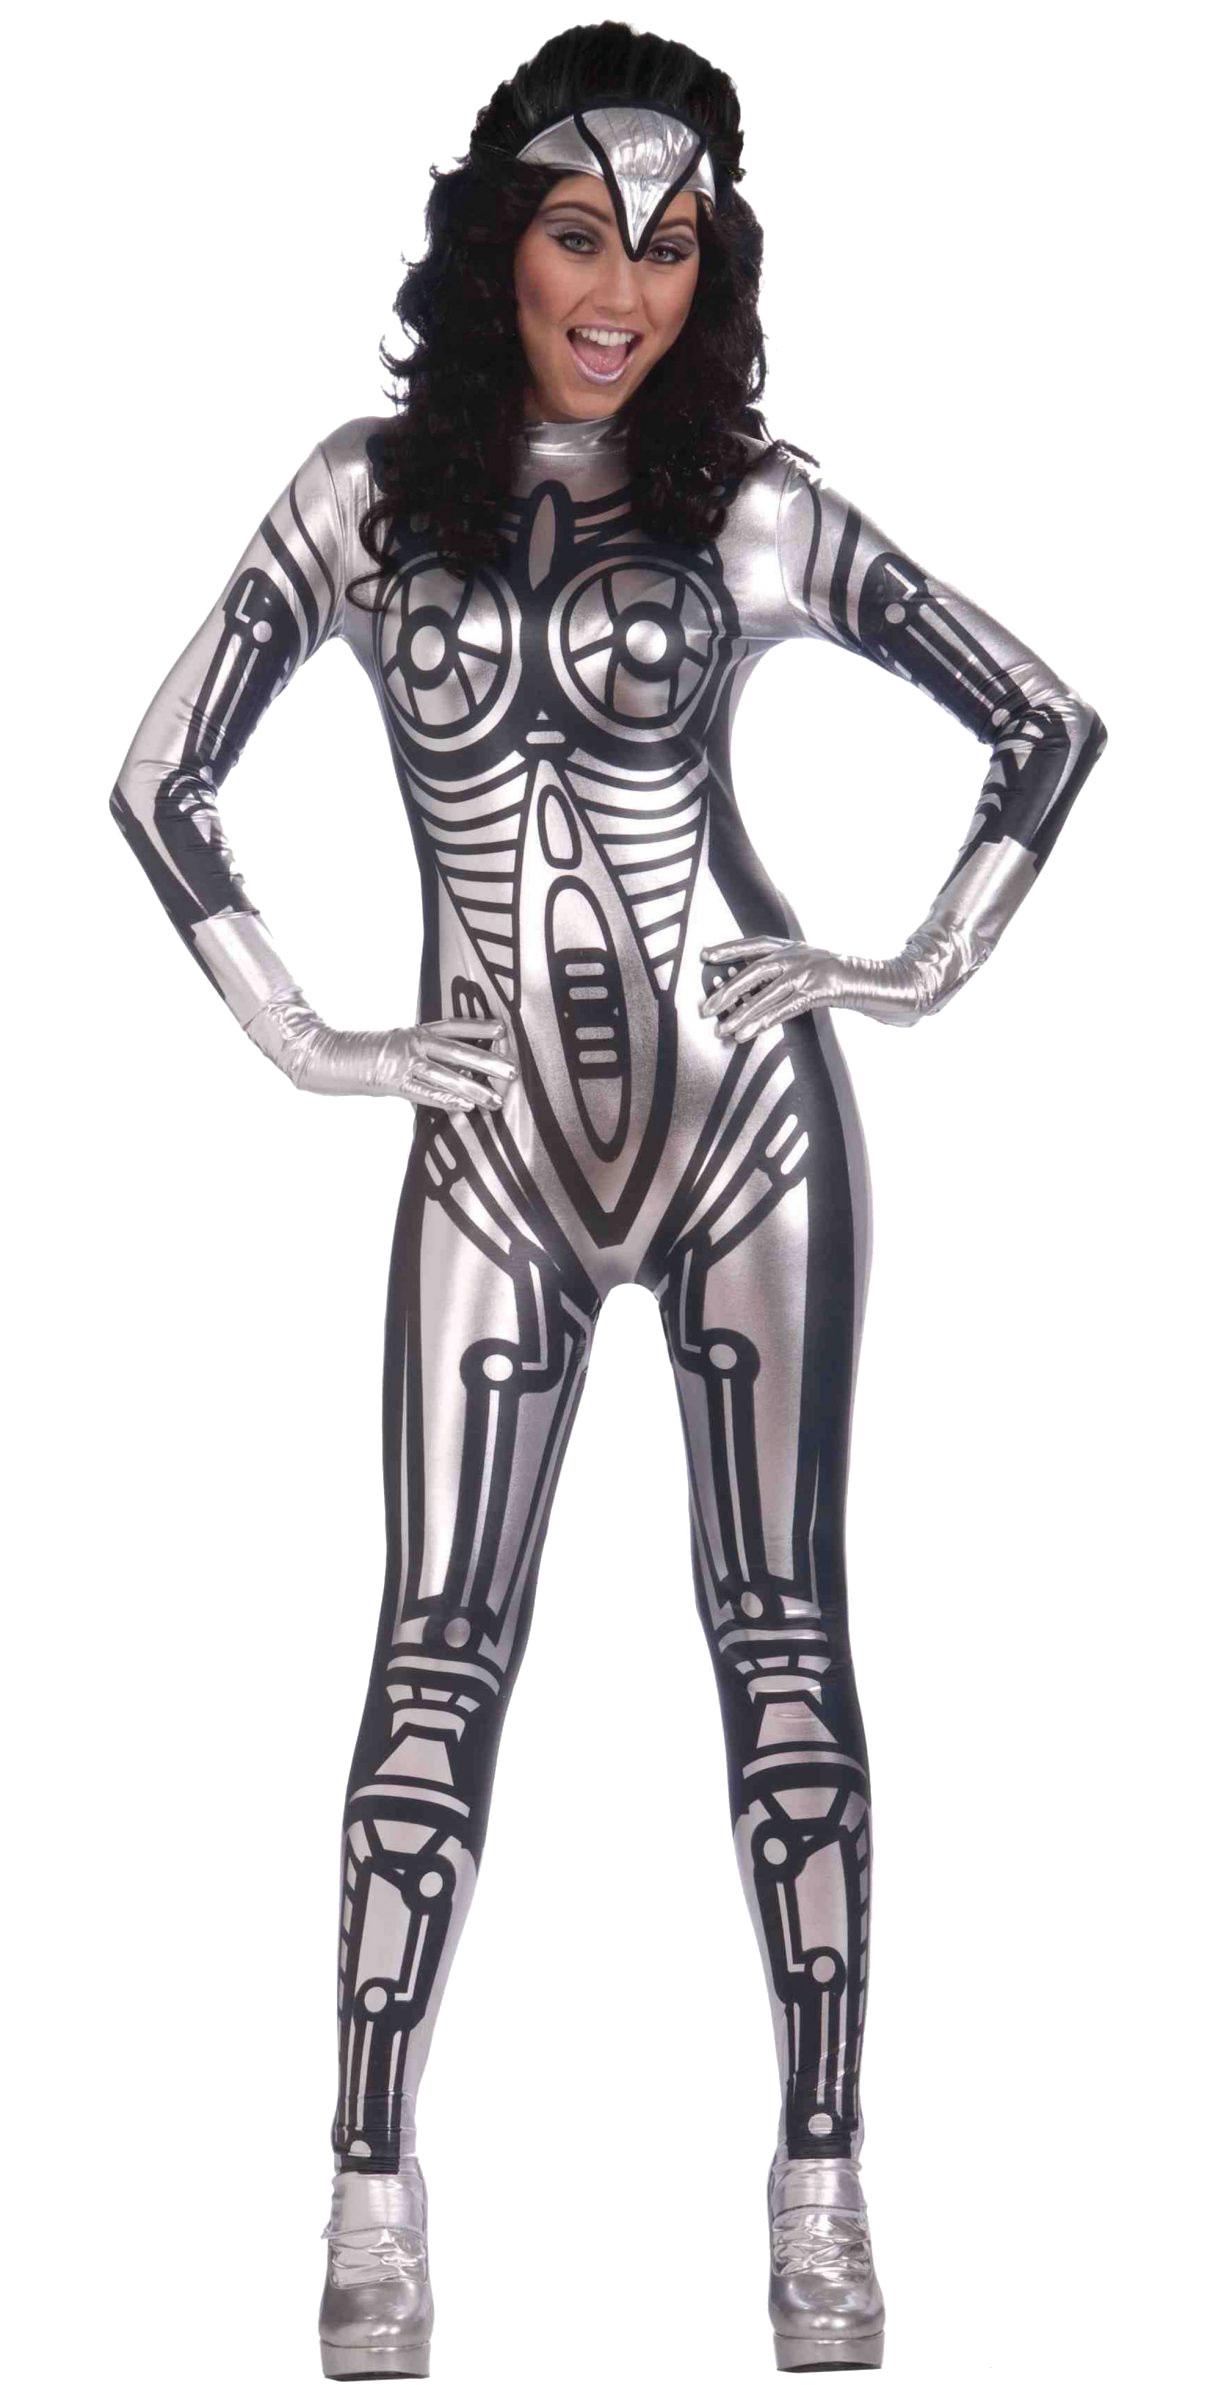 Cyborg Costume or Female Robot Costume - one-size 10-14 AC286 available here at Karnival Costumes online party shop